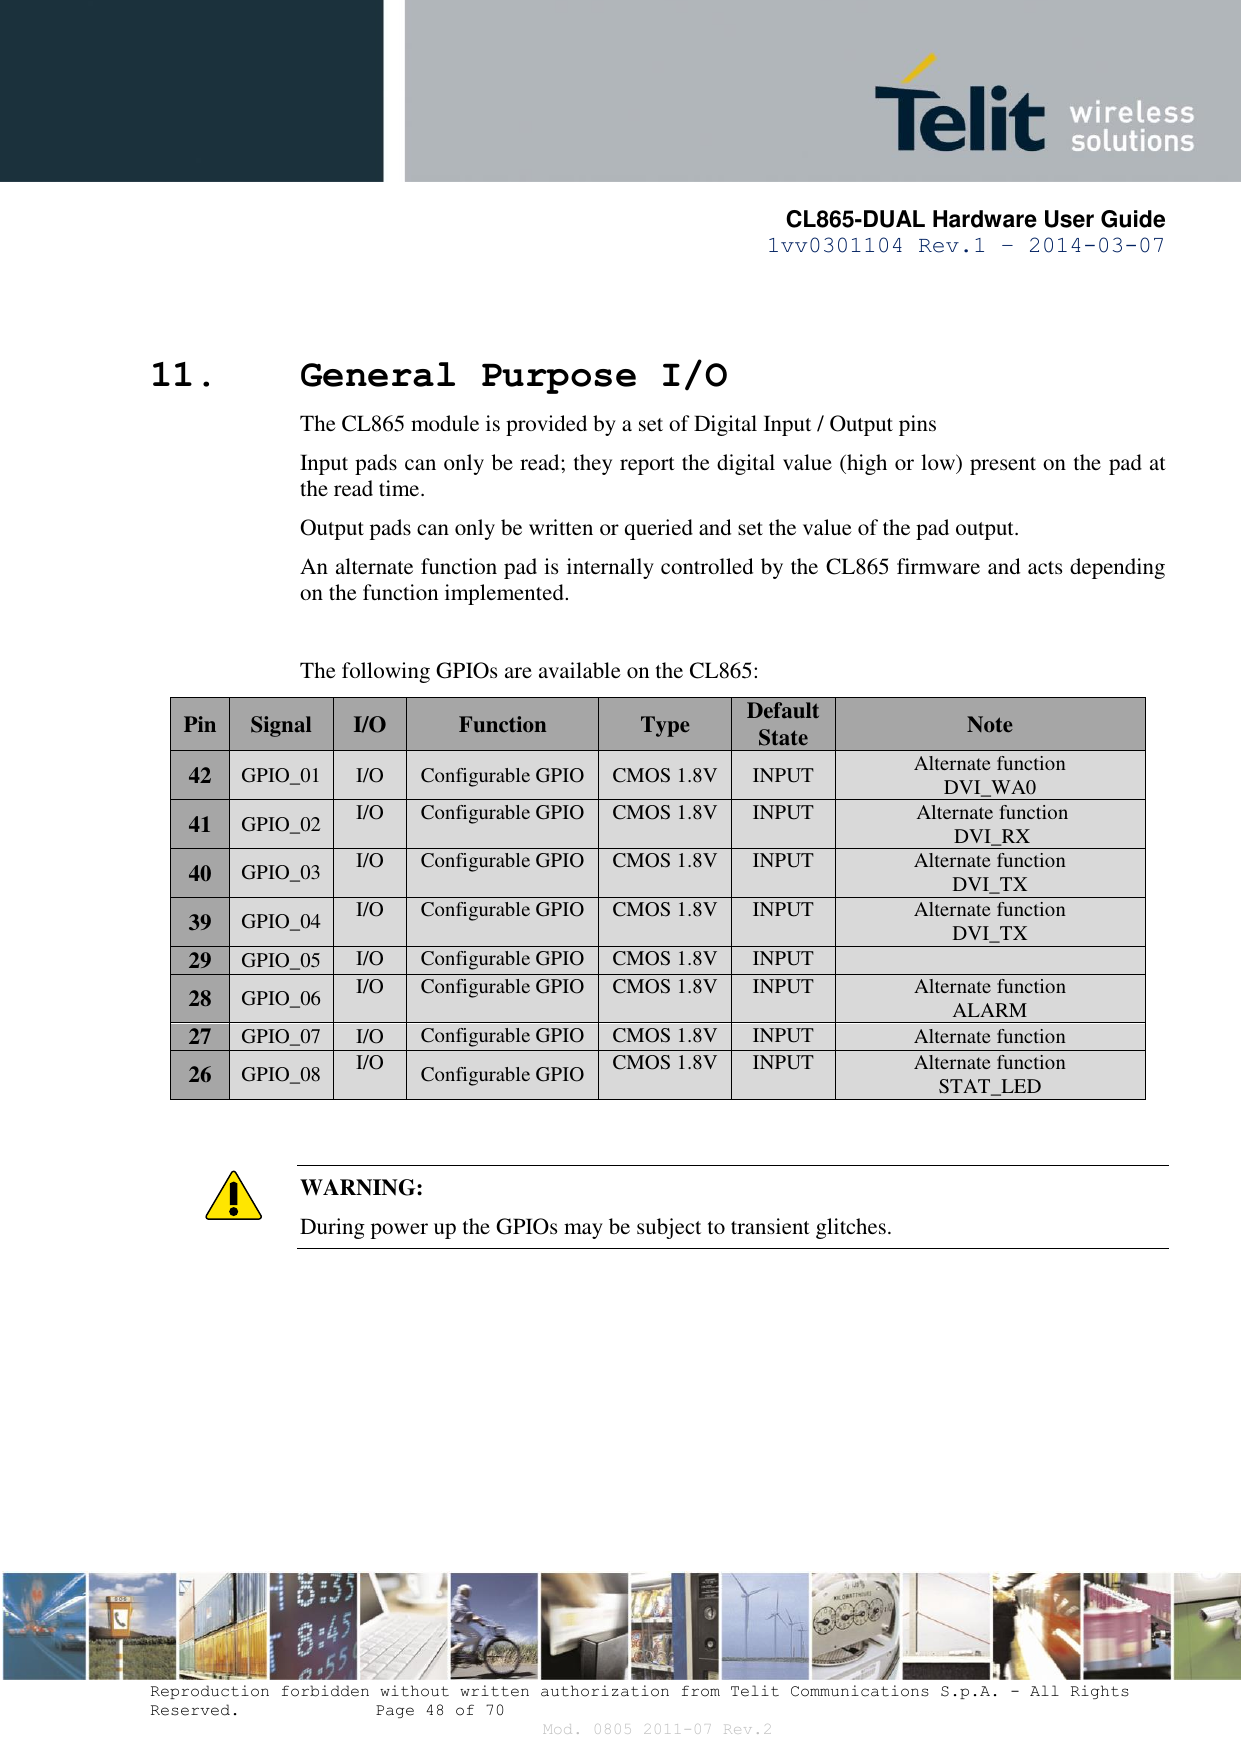       CL865-DUAL Hardware User Guide 1vv0301104 Rev.1 – 2014-03-07  Reproduction forbidden without written authorization from Telit Communications S.p.A. - All Rights Reserved.    Page 48 of 70 Mod. 0805 2011-07 Rev.2 11. General Purpose I/O The CL865 module is provided by a set of Digital Input / Output pins Input pads can only be read; they report the digital value (high or low) present on the pad at the read time. Output pads can only be written or queried and set the value of the pad output. An alternate function pad is internally controlled by the CL865 firmware and acts depending on the function implemented.  The following GPIOs are available on the CL865: Pin Signal I/O Function Type Default State Note 42 GPIO_01 I/O Configurable GPIO CMOS 1.8V INPUT Alternate function DVI_WA0 41 GPIO_02 I/O Configurable GPIO CMOS 1.8V INPUT Alternate function DVI_RX 40 GPIO_03 I/O Configurable GPIO CMOS 1.8V INPUT Alternate function DVI_TX 39 GPIO_04 I/O Configurable GPIO CMOS 1.8V INPUT Alternate function DVI_TX 29 GPIO_05 I/O Configurable GPIO CMOS 1.8V INPUT  28 GPIO_06 I/O Configurable GPIO CMOS 1.8V INPUT Alternate function  ALARM 27 GPIO_07 I/O Configurable GPIO CMOS 1.8V INPUT Alternate function 26 GPIO_08 I/O Configurable GPIO CMOS 1.8V INPUT Alternate function STAT_LED   WARNING: During power up the GPIOs may be subject to transient glitches.   